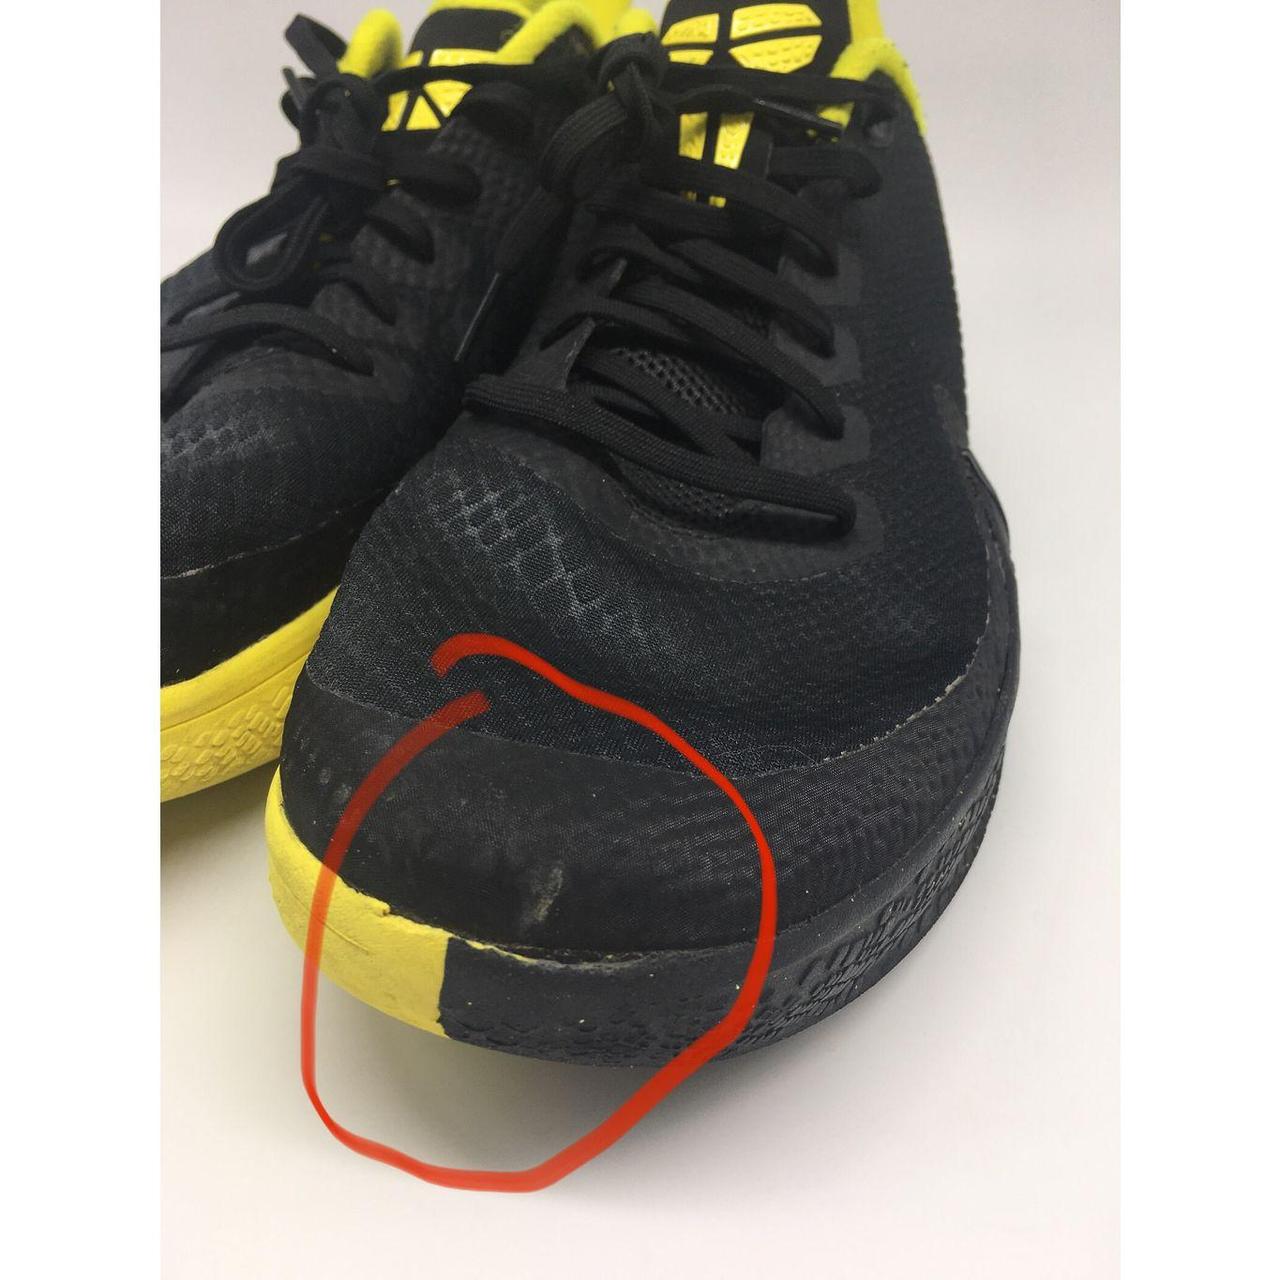 Product Image 3 - Used. Left shoes has a